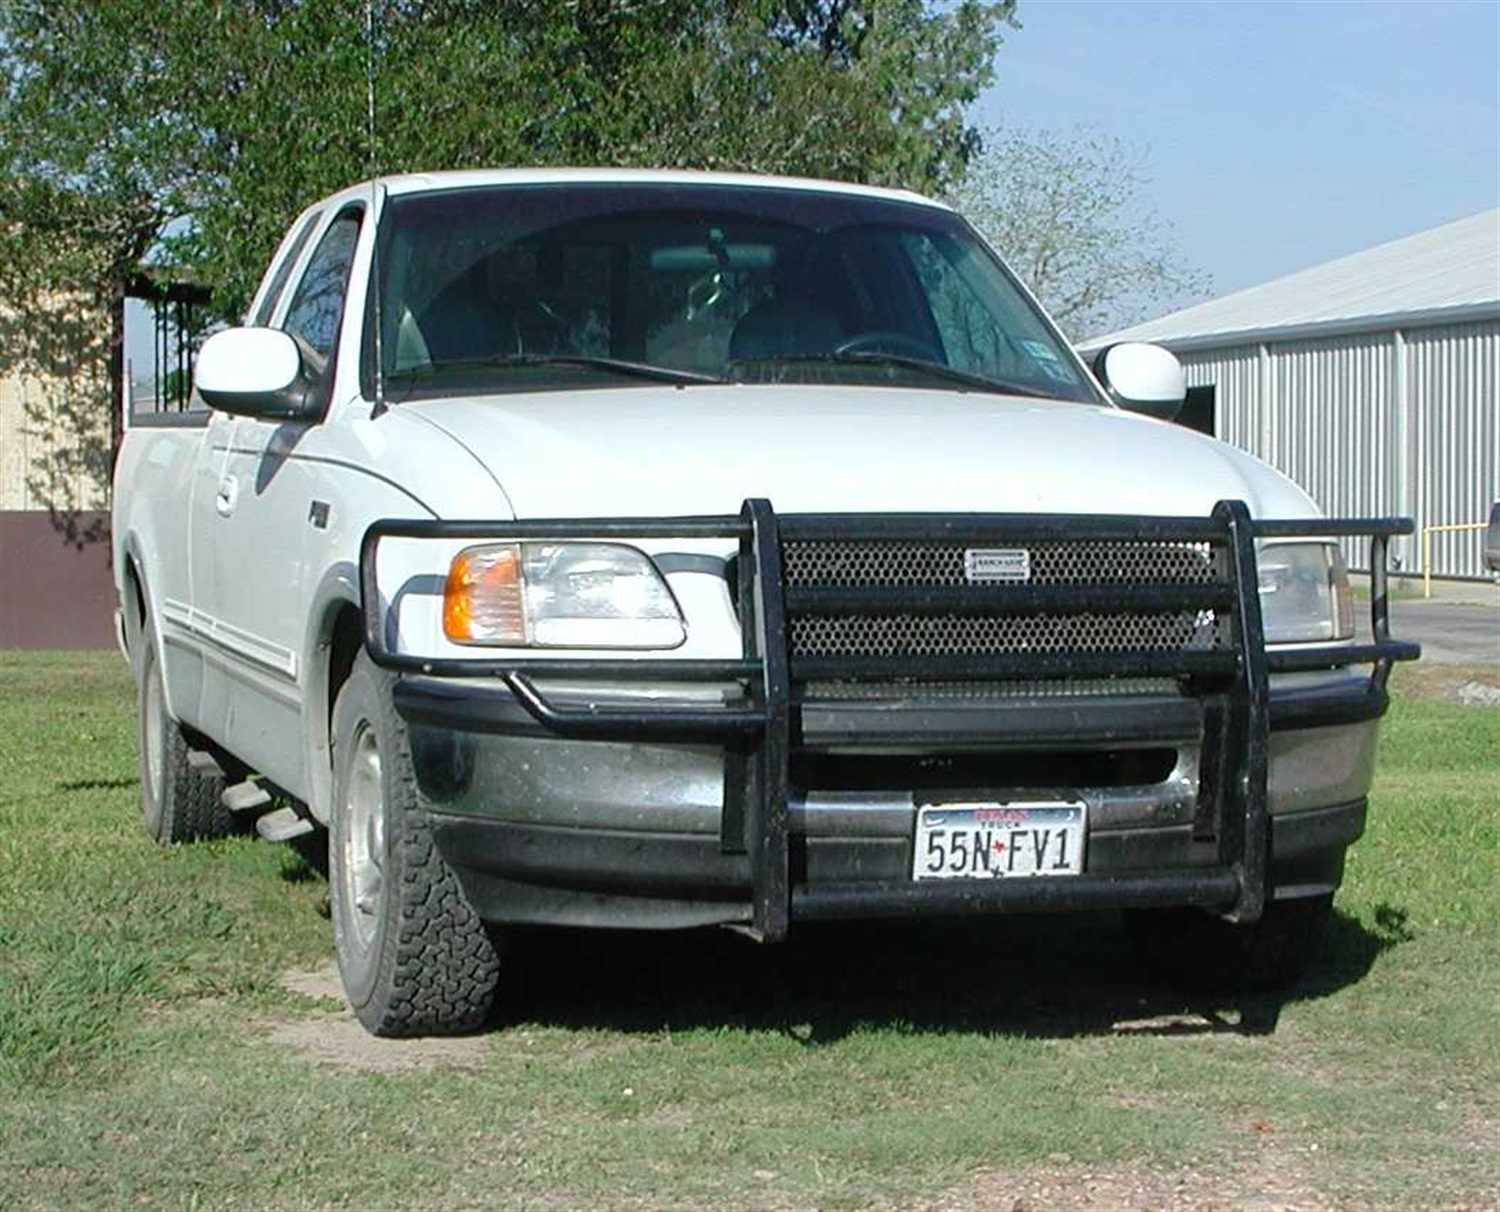 Ranch Hand Ranch Hand GGF974BL1 Legend Series; Grille Guard Fits Expedition F-150 F-250